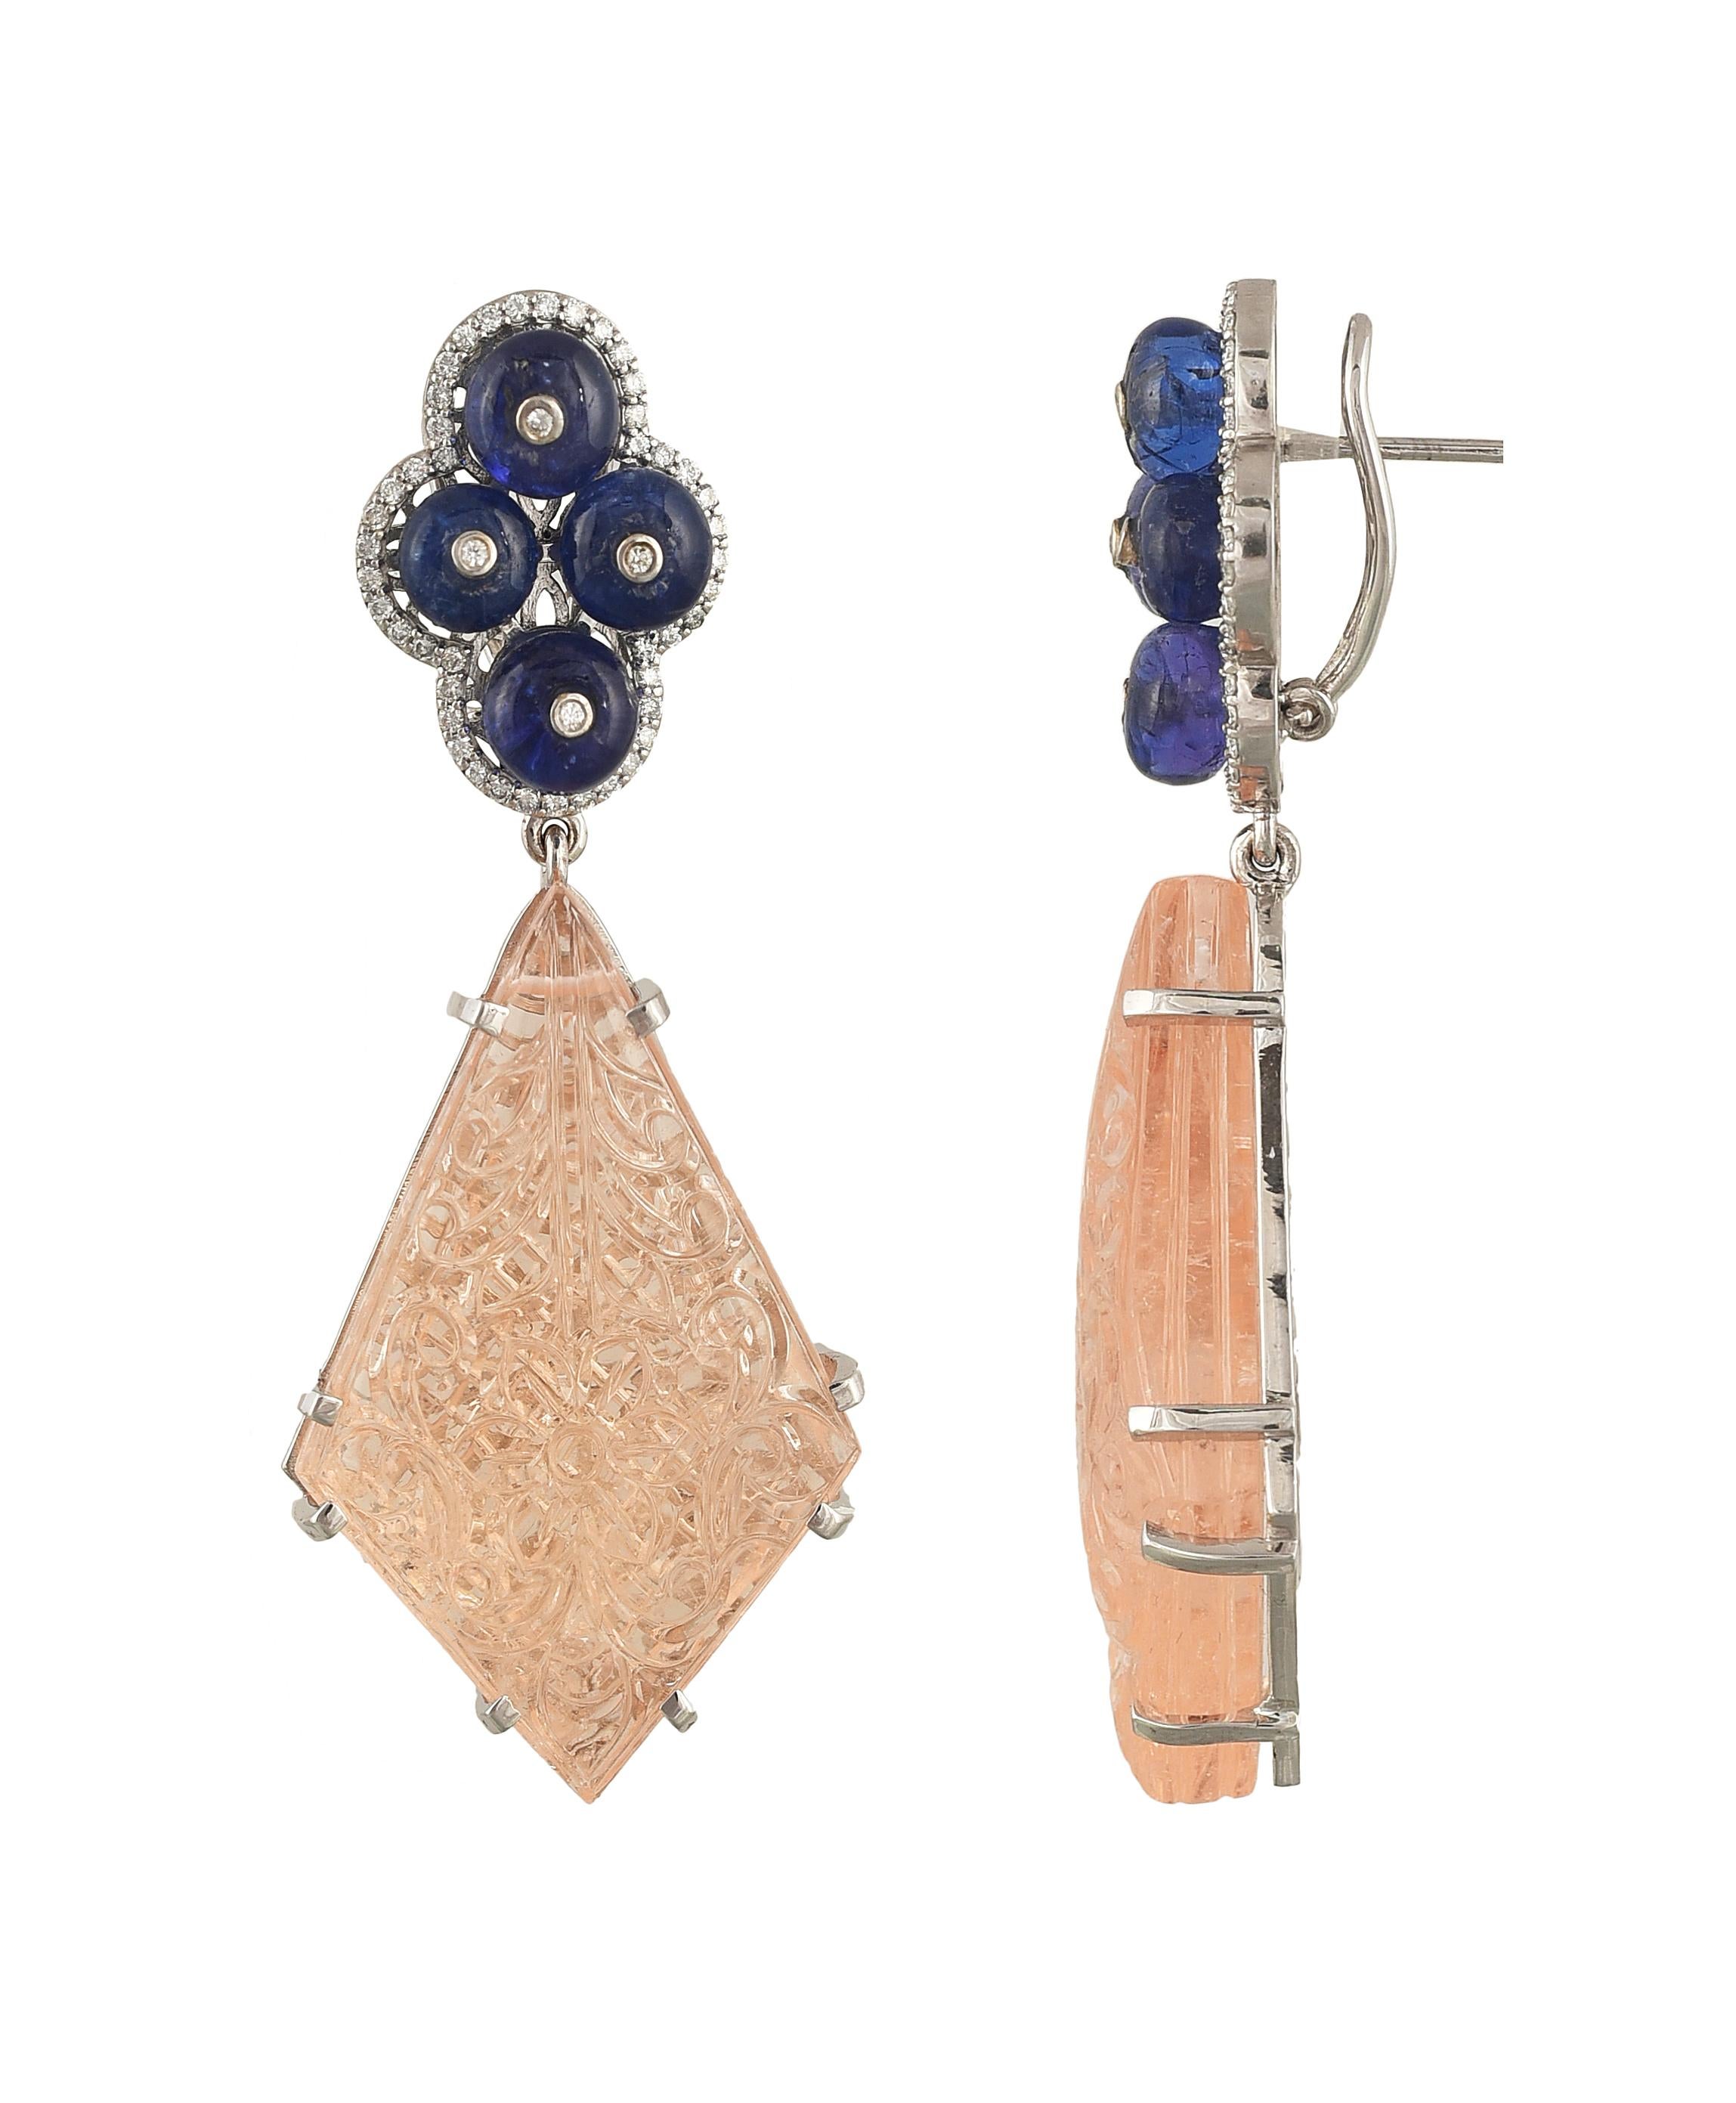 A gorgeous and very different pair of earrings set in 18K gold with diamonds, tanzanite and carved Morganite. The Tanzanite is natural, originating from Tanzania, weighs 22 carats. The Morganite is natural, carved and weighs 128.77 carats in total .